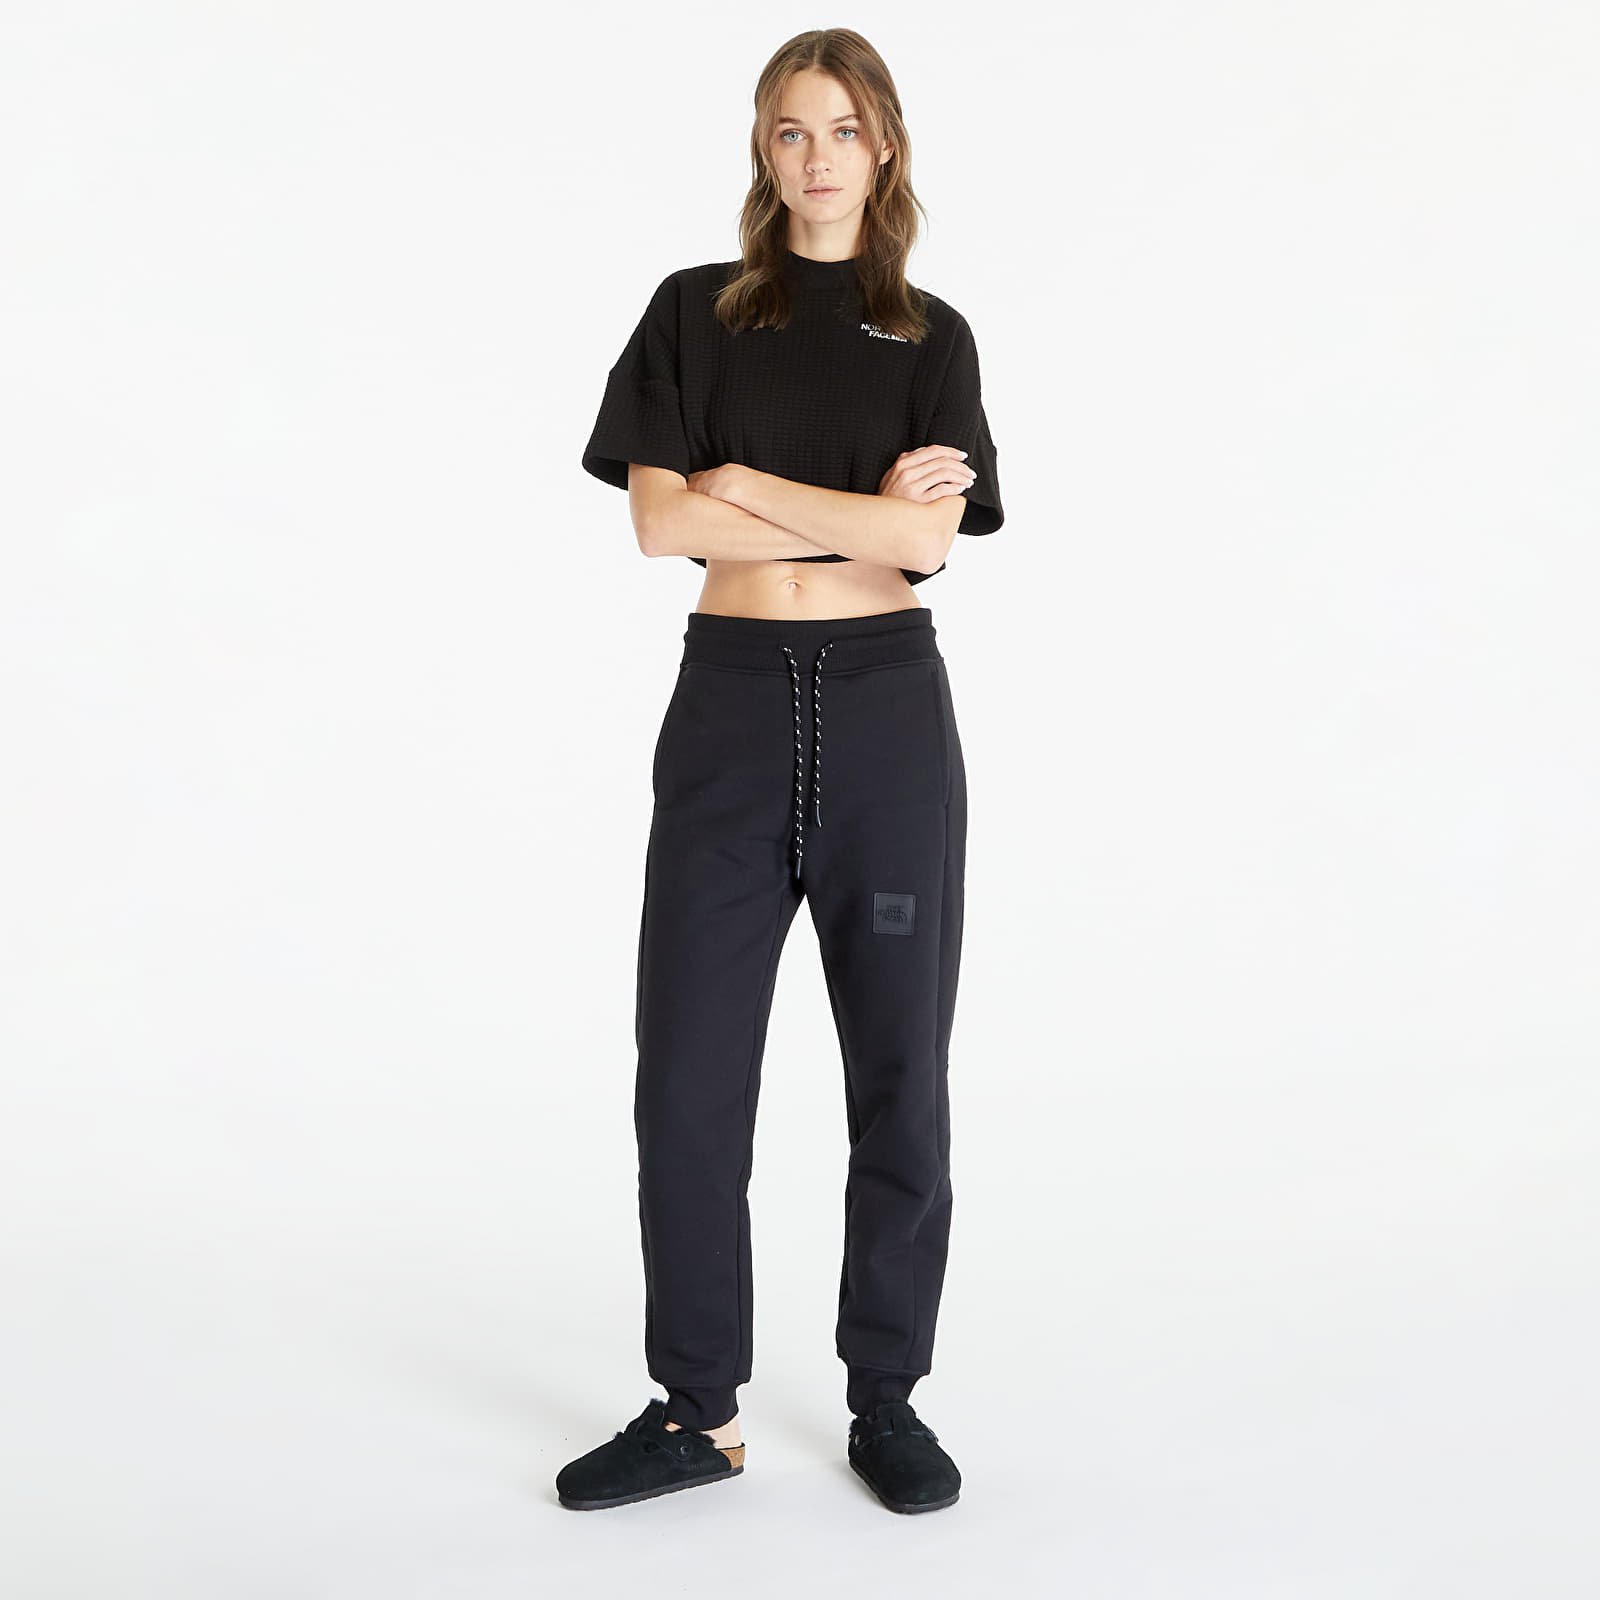 Unisex The 489 Jogger